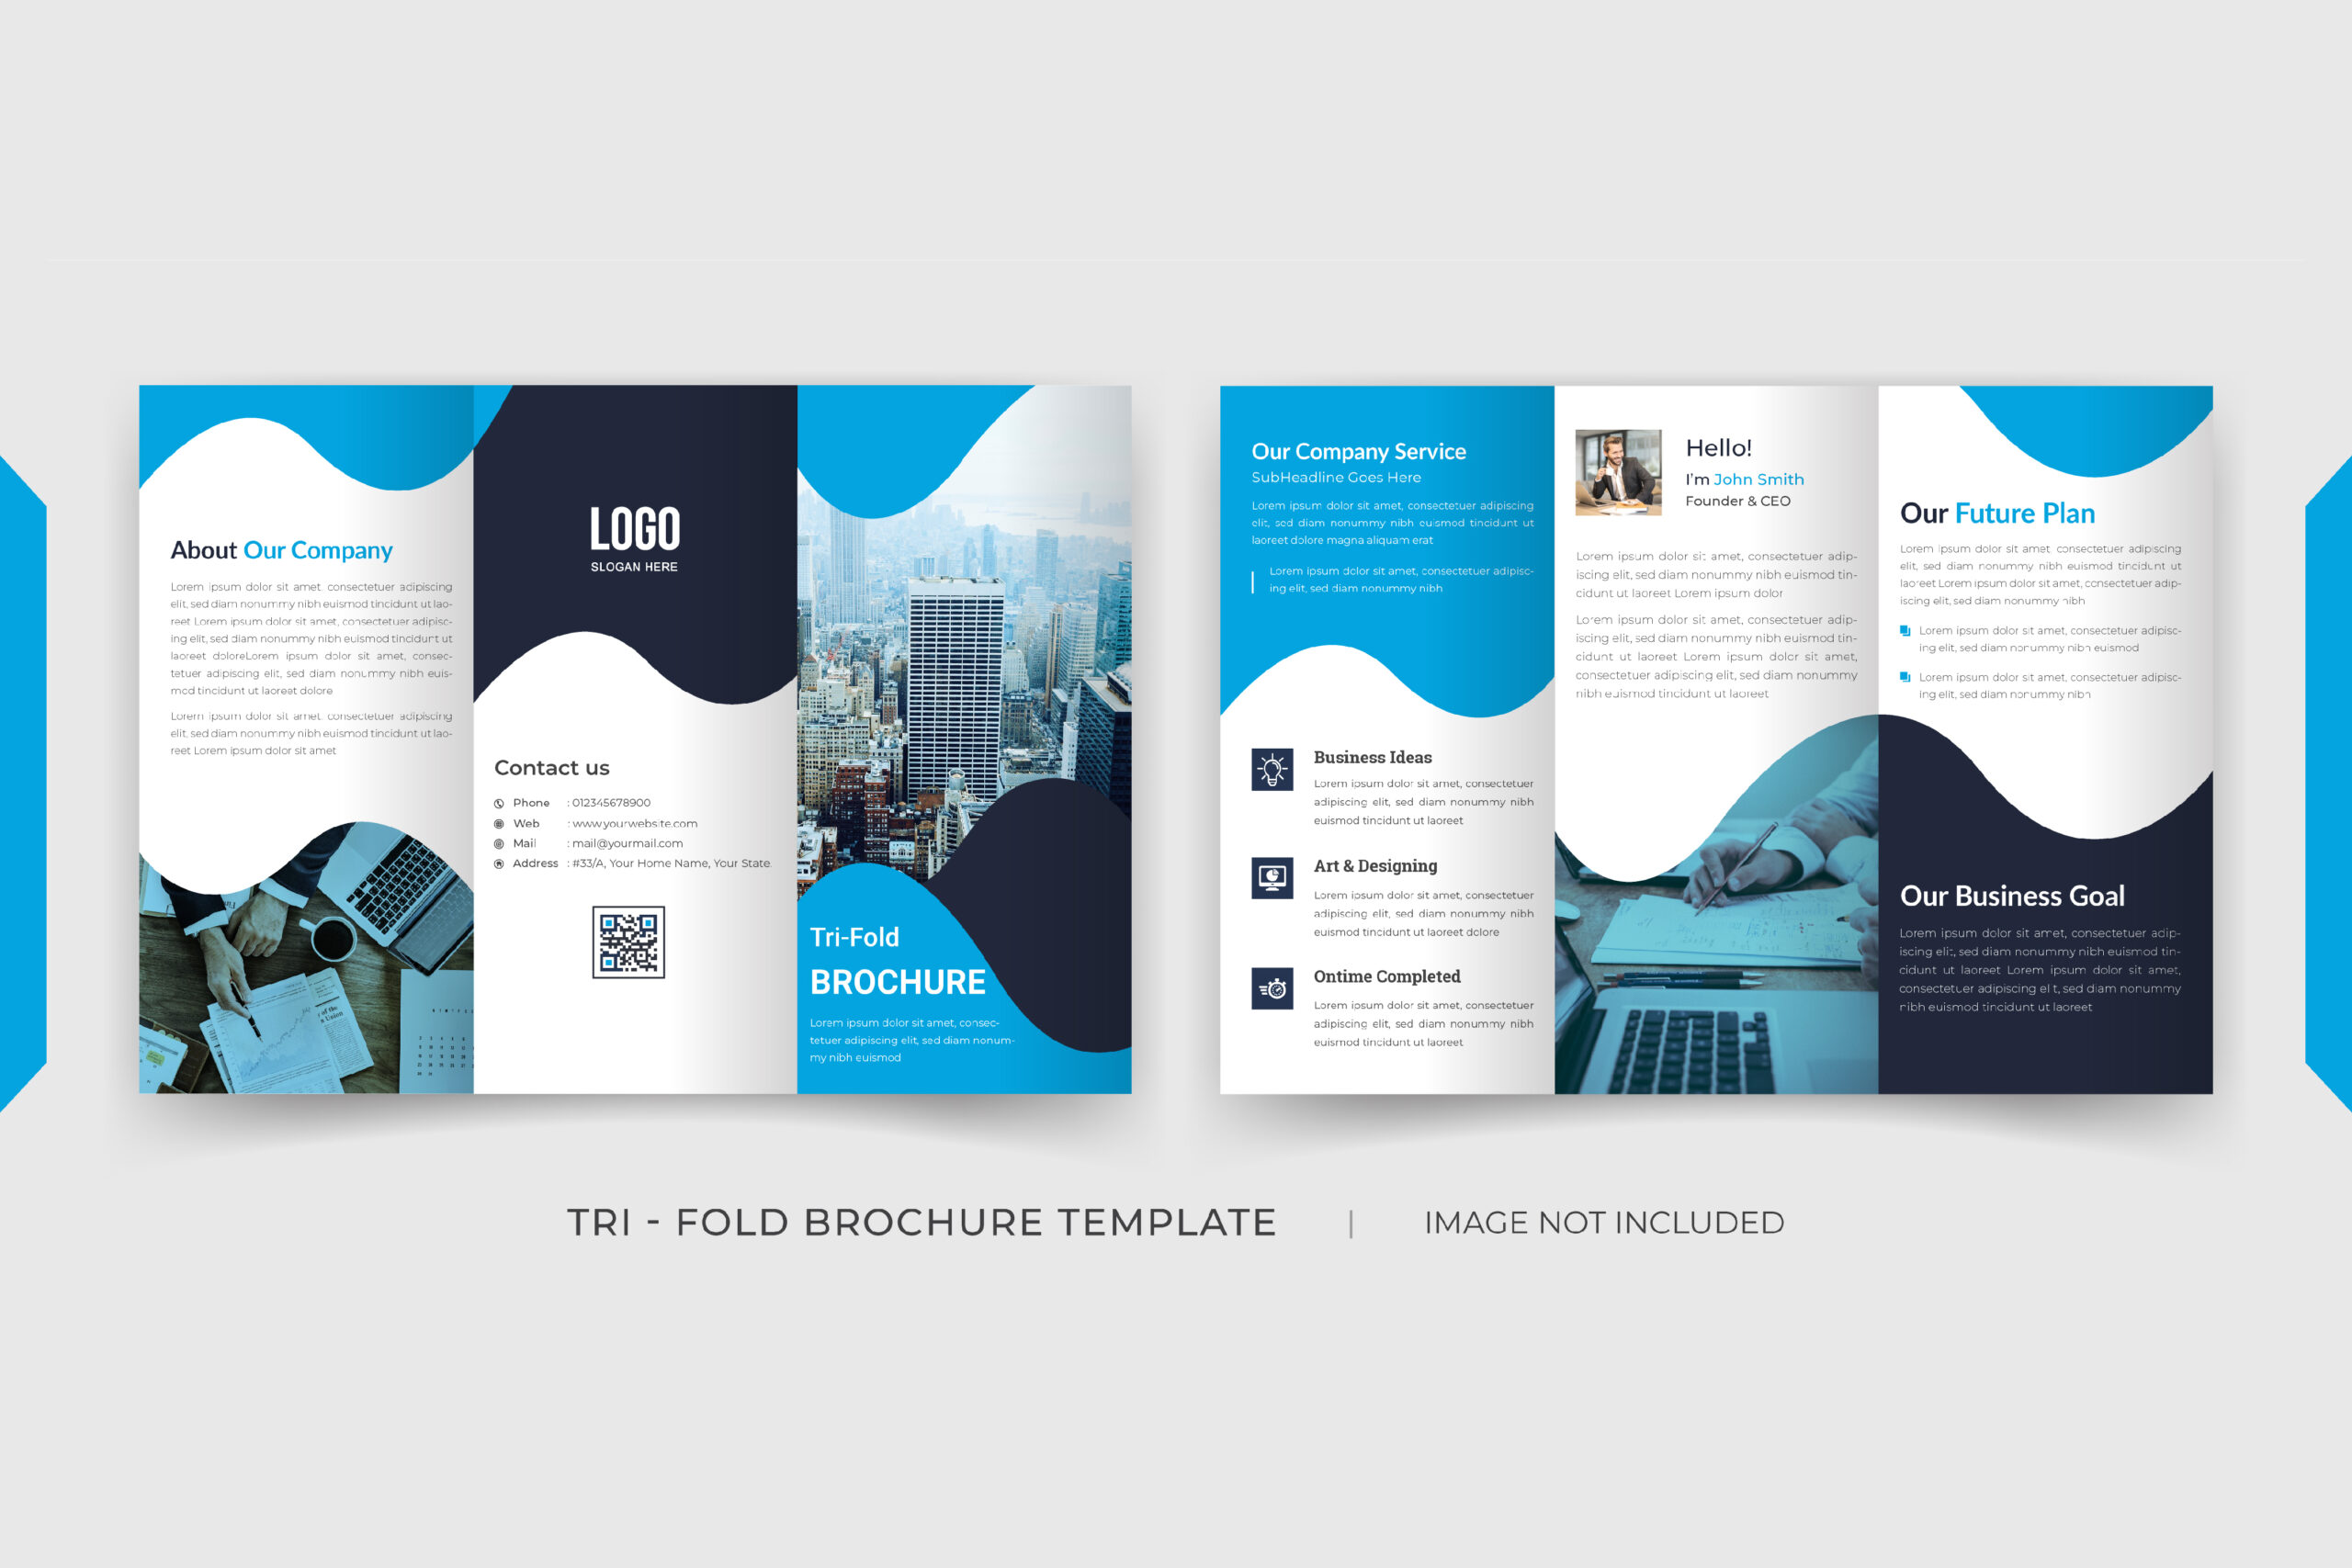 10 Pages Tri Fold Brochure Template Inside 6 Sided Brochure Template